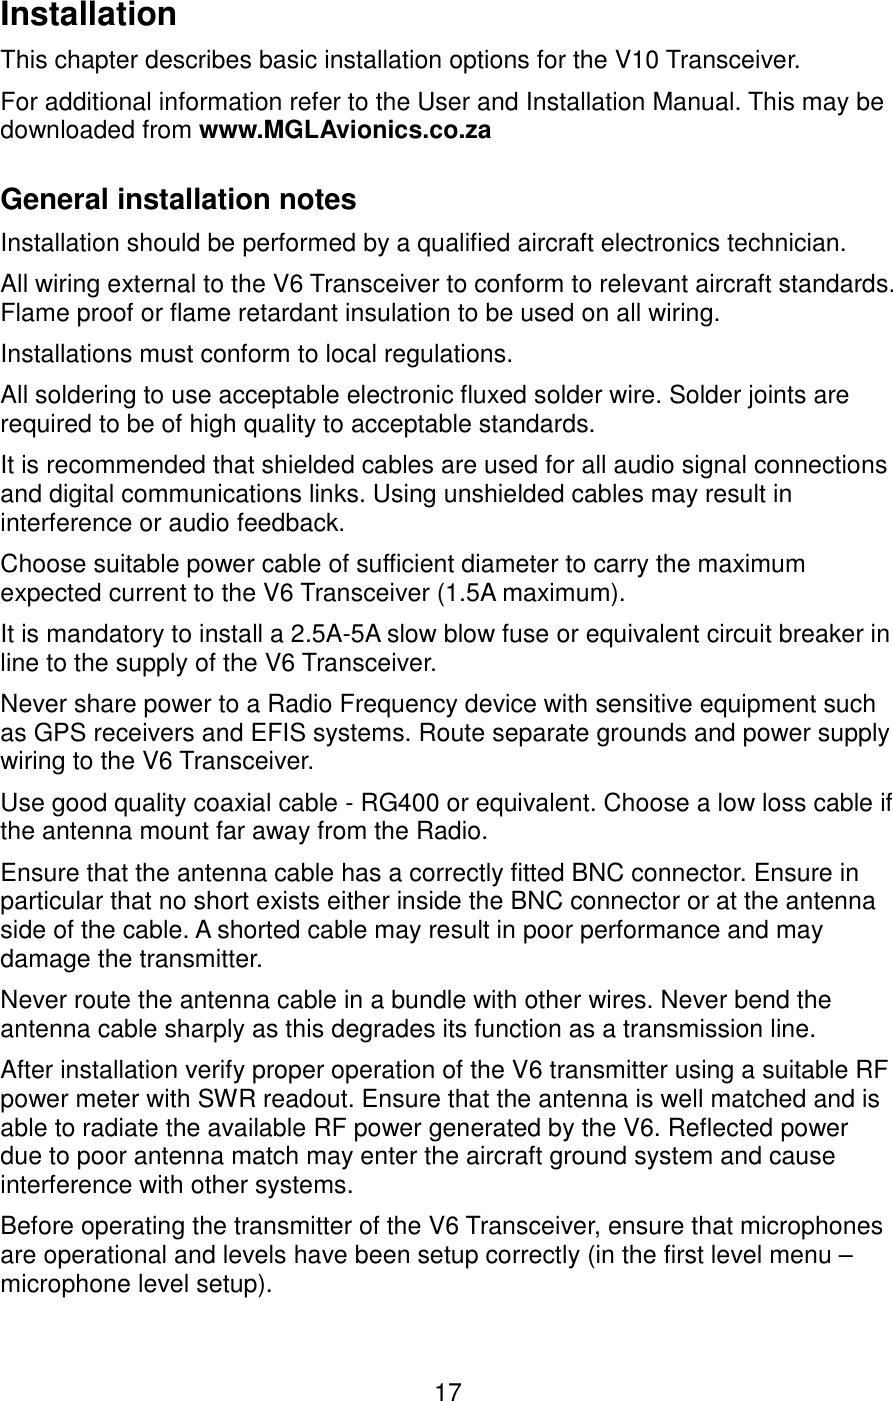 InstallationThis chapter describes basic installation options for the V10 Transceiver.For additional information refer to the User and Installation Manual. This may be downloaded from www.MGLAvionics.co.zaGeneral installation notes Installation should be performed by a qualified aircraft electronics technician.All wiring external to the V6 Transceiver to conform to relevant aircraft standards. Flame proof or flame retardant insulation to be used on all wiring.Installations must conform to local regulations.All soldering to use acceptable electronic fluxed solder wire. Solder joints are required to be of high quality to acceptable standards.It is recommended that shielded cables are used for all audio signal connections and digital communications links. Using unshielded cables may result in interference or audio feedback.Choose suitable power cable of sufficient diameter to carry the maximum expected current to the V6 Transceiver (1.5A maximum).It is mandatory to install a 2.5A-5A slow blow fuse or equivalent circuit breaker in line to the supply of the V6 Transceiver.Never share power to a Radio Frequency device with sensitive equipment such as GPS receivers and EFIS systems. Route separate grounds and power supply wiring to the V6 Transceiver.Use good quality coaxial cable - RG400 or equivalent. Choose a low loss cable if the antenna mount far away from the Radio.Ensure that the antenna cable has a correctly fitted BNC connector. Ensure in particular that no short exists either inside the BNC connector or at the antenna side of the cable. A shorted cable may result in poor performance and may damage the transmitter.Never route the antenna cable in a bundle with other wires. Never bend the antenna cable sharply as this degrades its function as a transmission line.After installation verify proper operation of the V6 transmitter using a suitable RF power meter with SWR readout. Ensure that the antenna is well matched and is able to radiate the available RF power generated by the V6. Reflected power due to poor antenna match may enter the aircraft ground system and cause interference with other systems. Before operating the transmitter of the V6 Transceiver, ensure that microphones are operational and levels have been setup correctly (in the first level menu – microphone level setup). 17